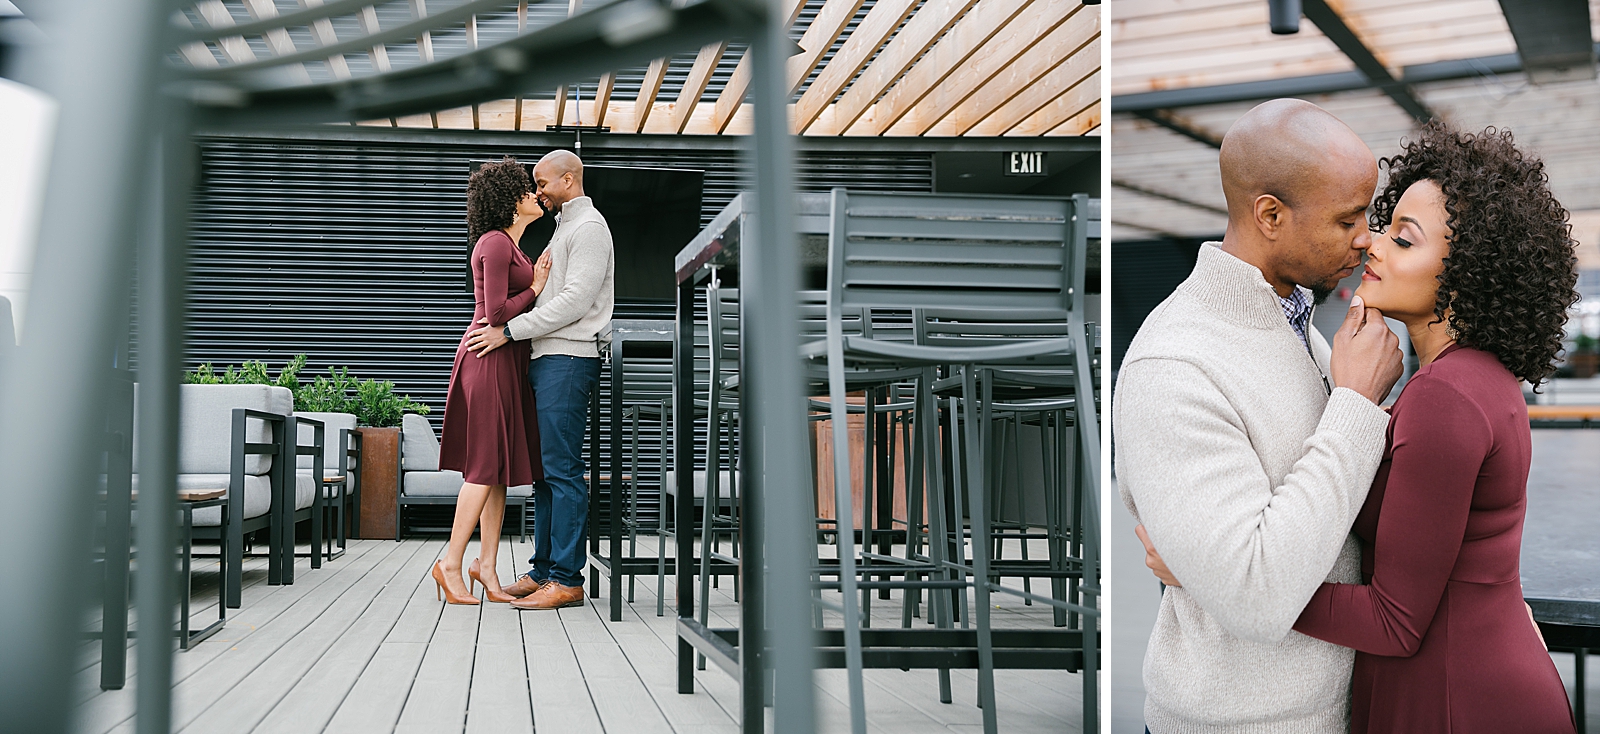 Engagement session guide